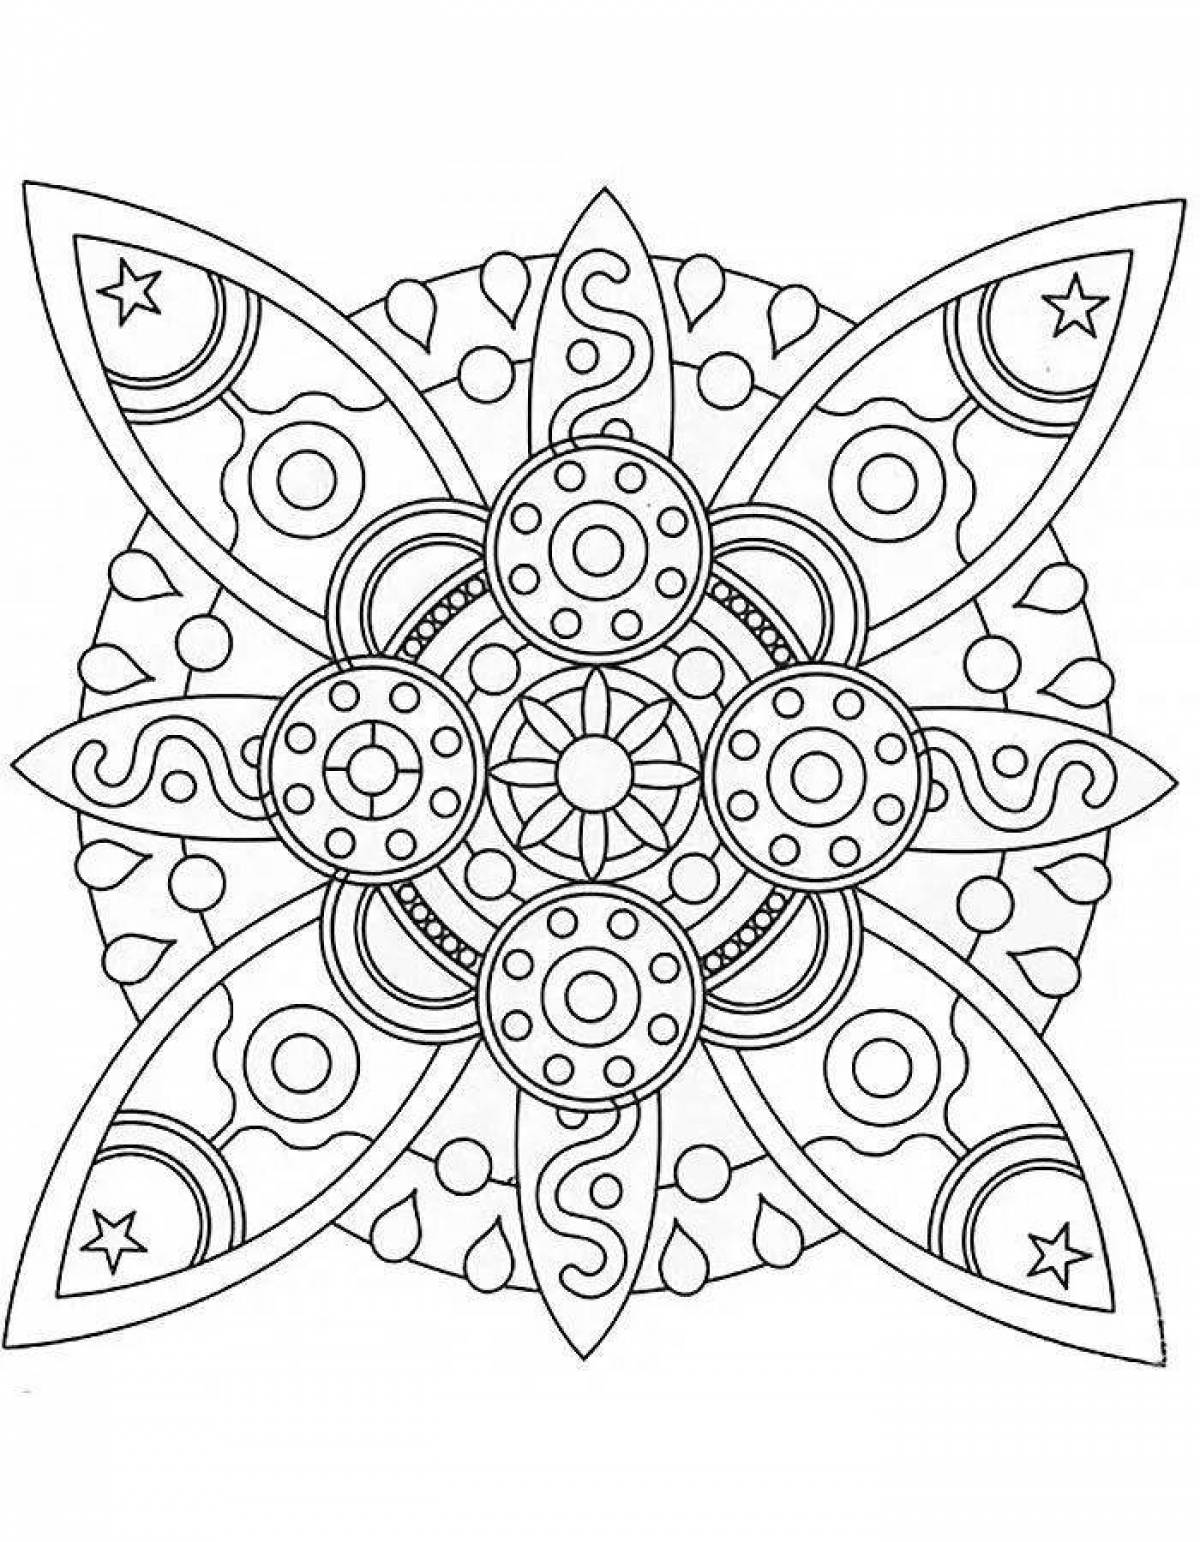 Inspirational patterns and ornaments for coloring